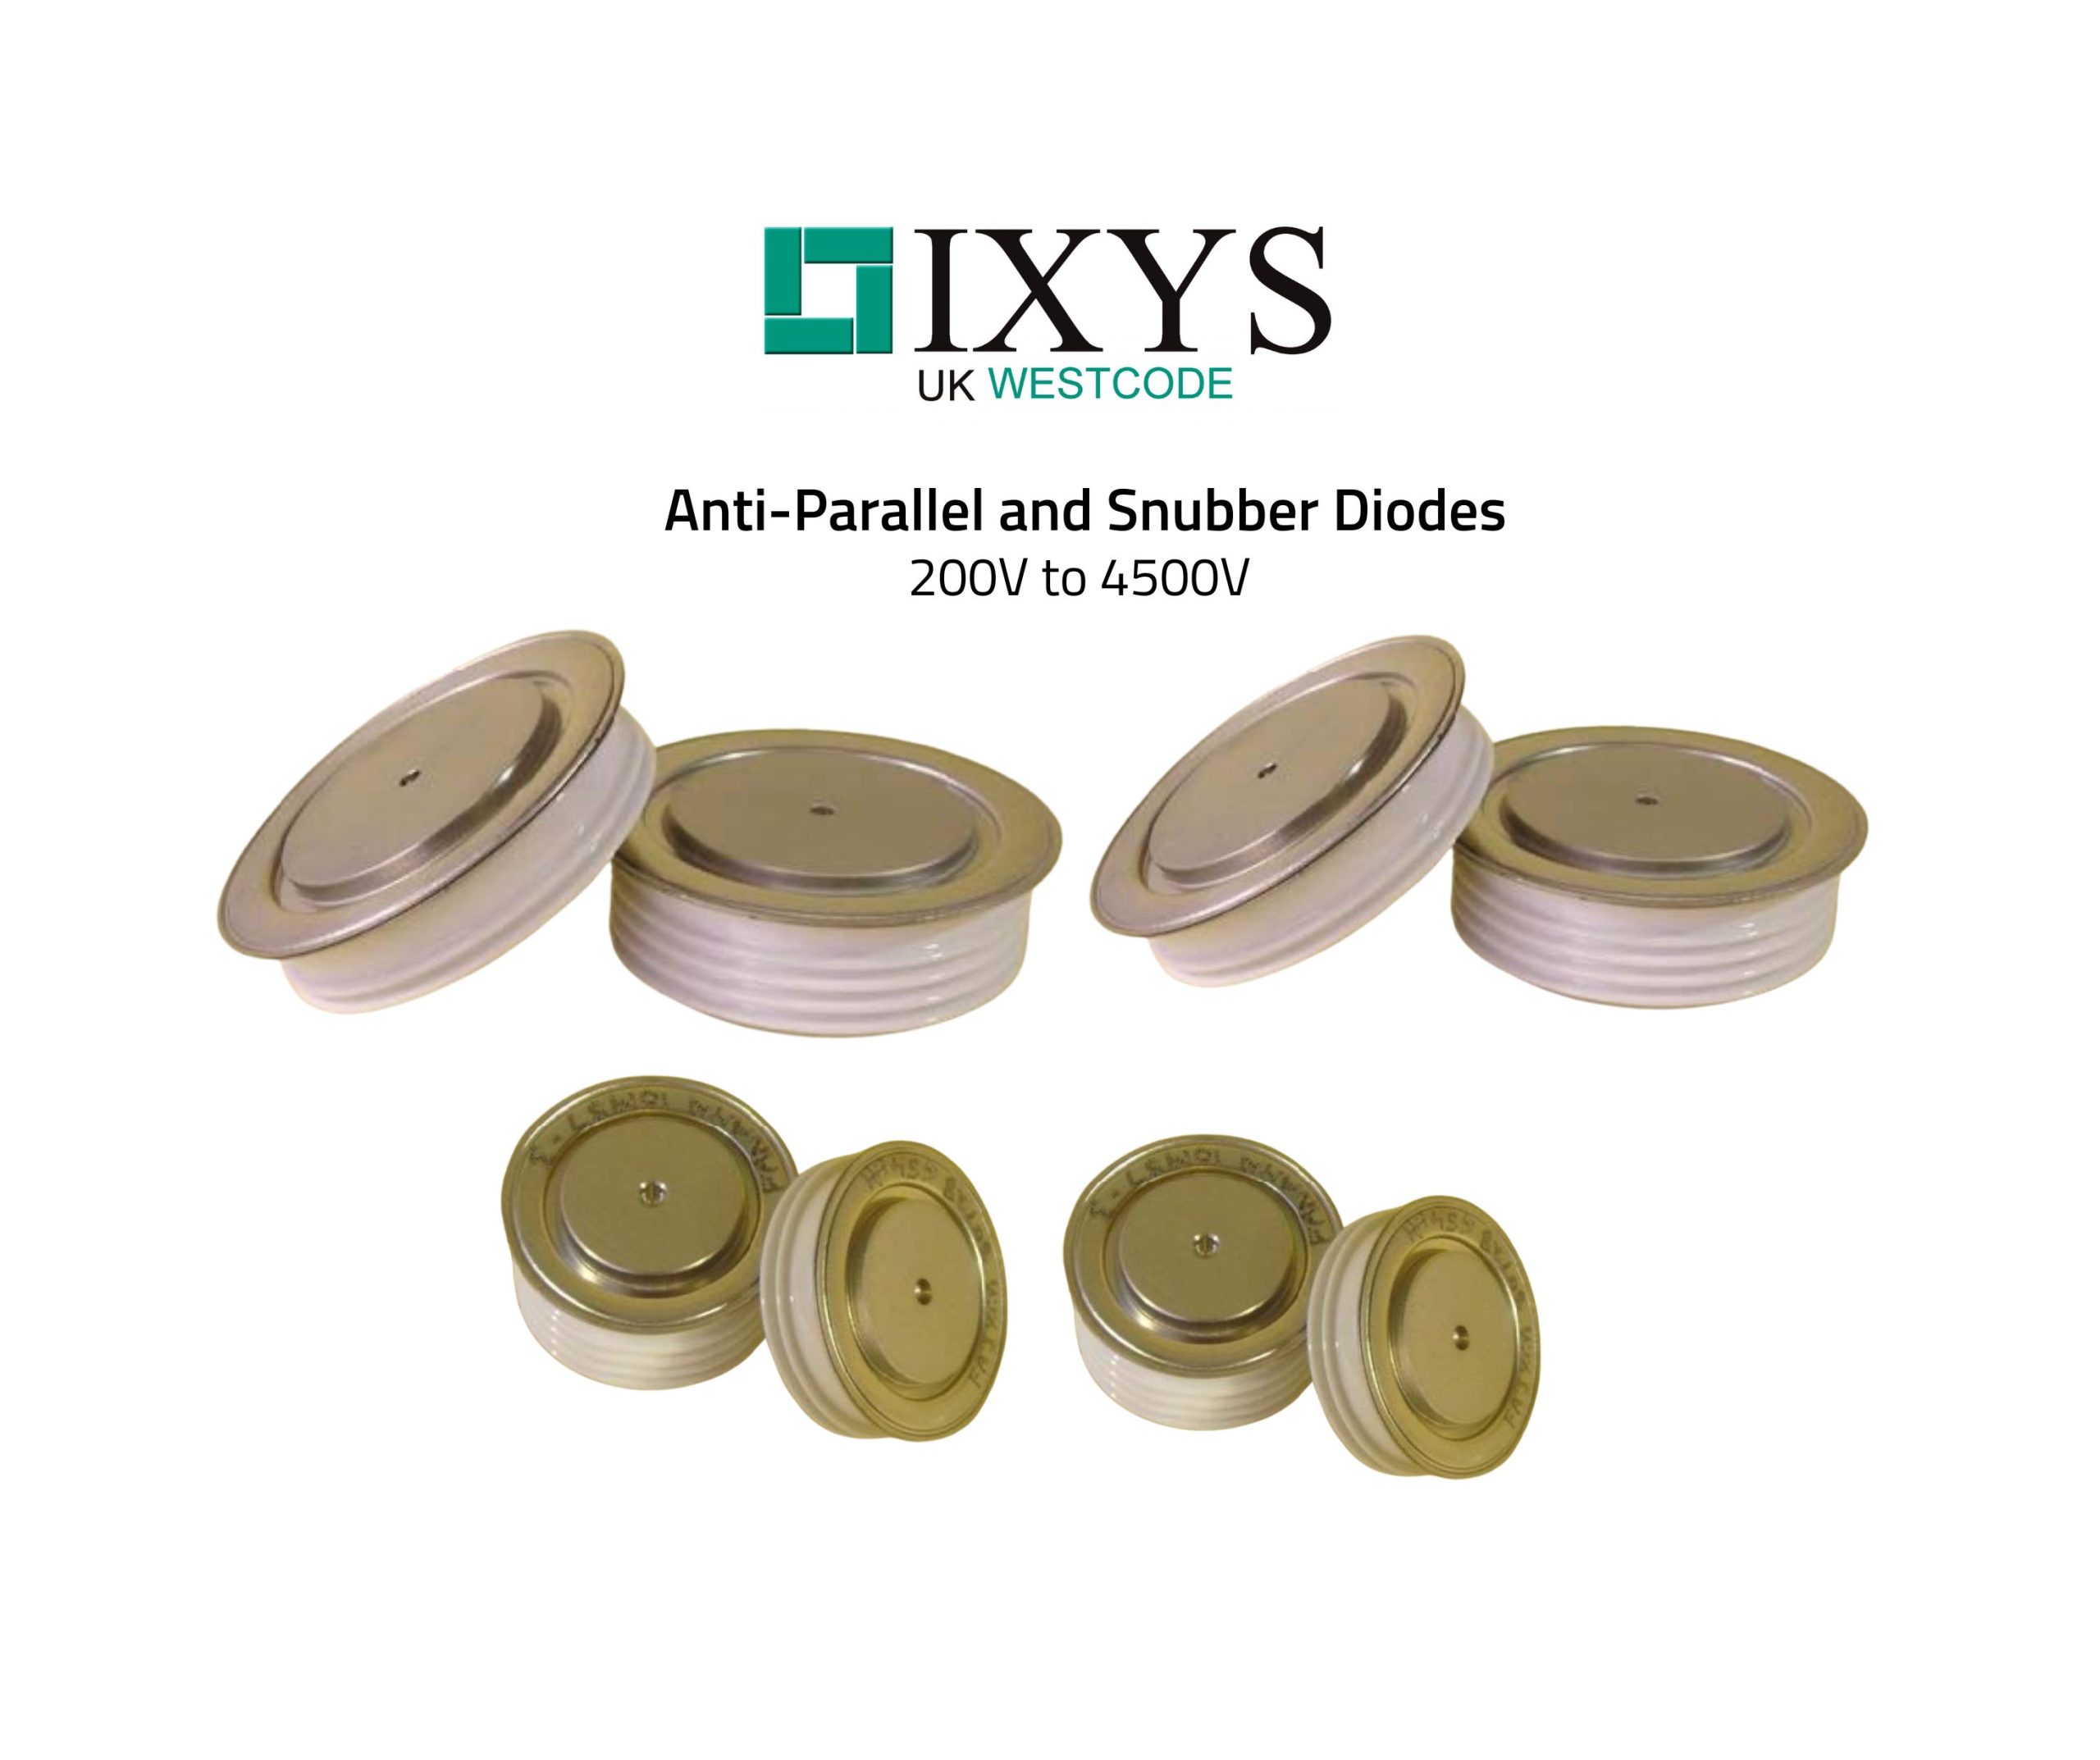 IXYS UK Westcode Anti-Parallel and Snubber Diodes